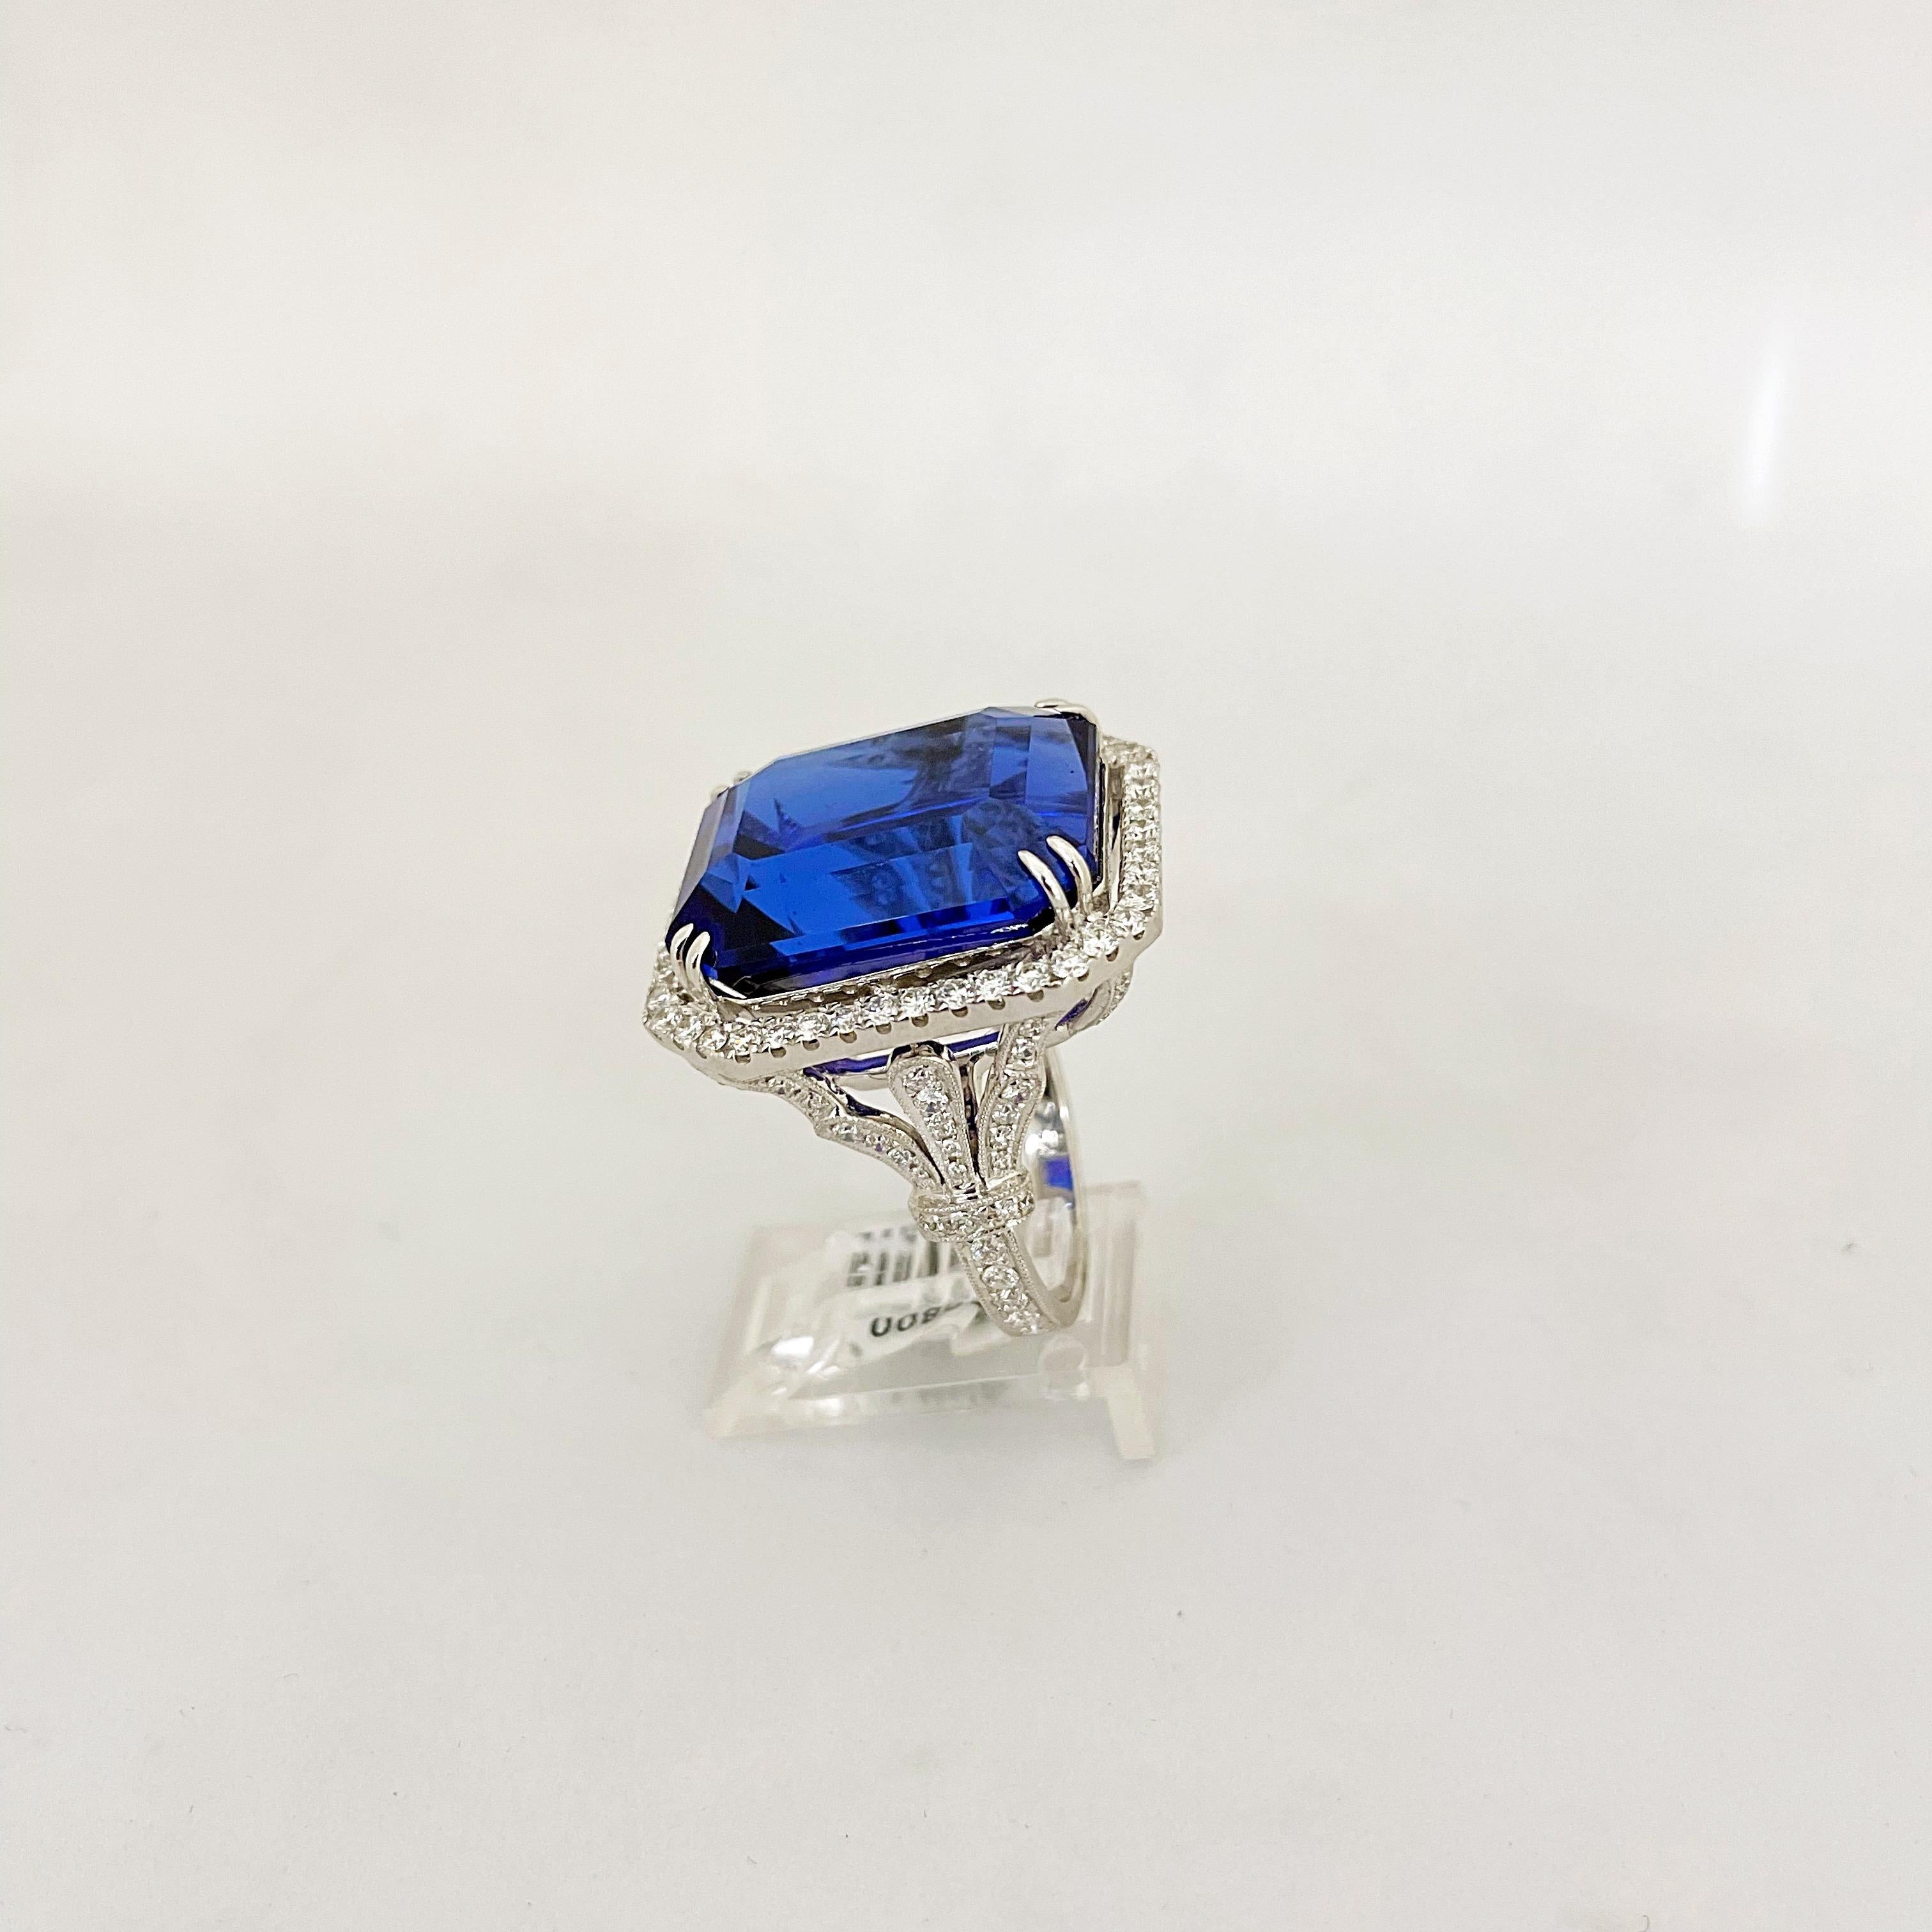 Cellini Jewelers 18KT Gold, 32.27 Carat Tanzanite Ring with 1.45 Carat Diamonds For Sale 3